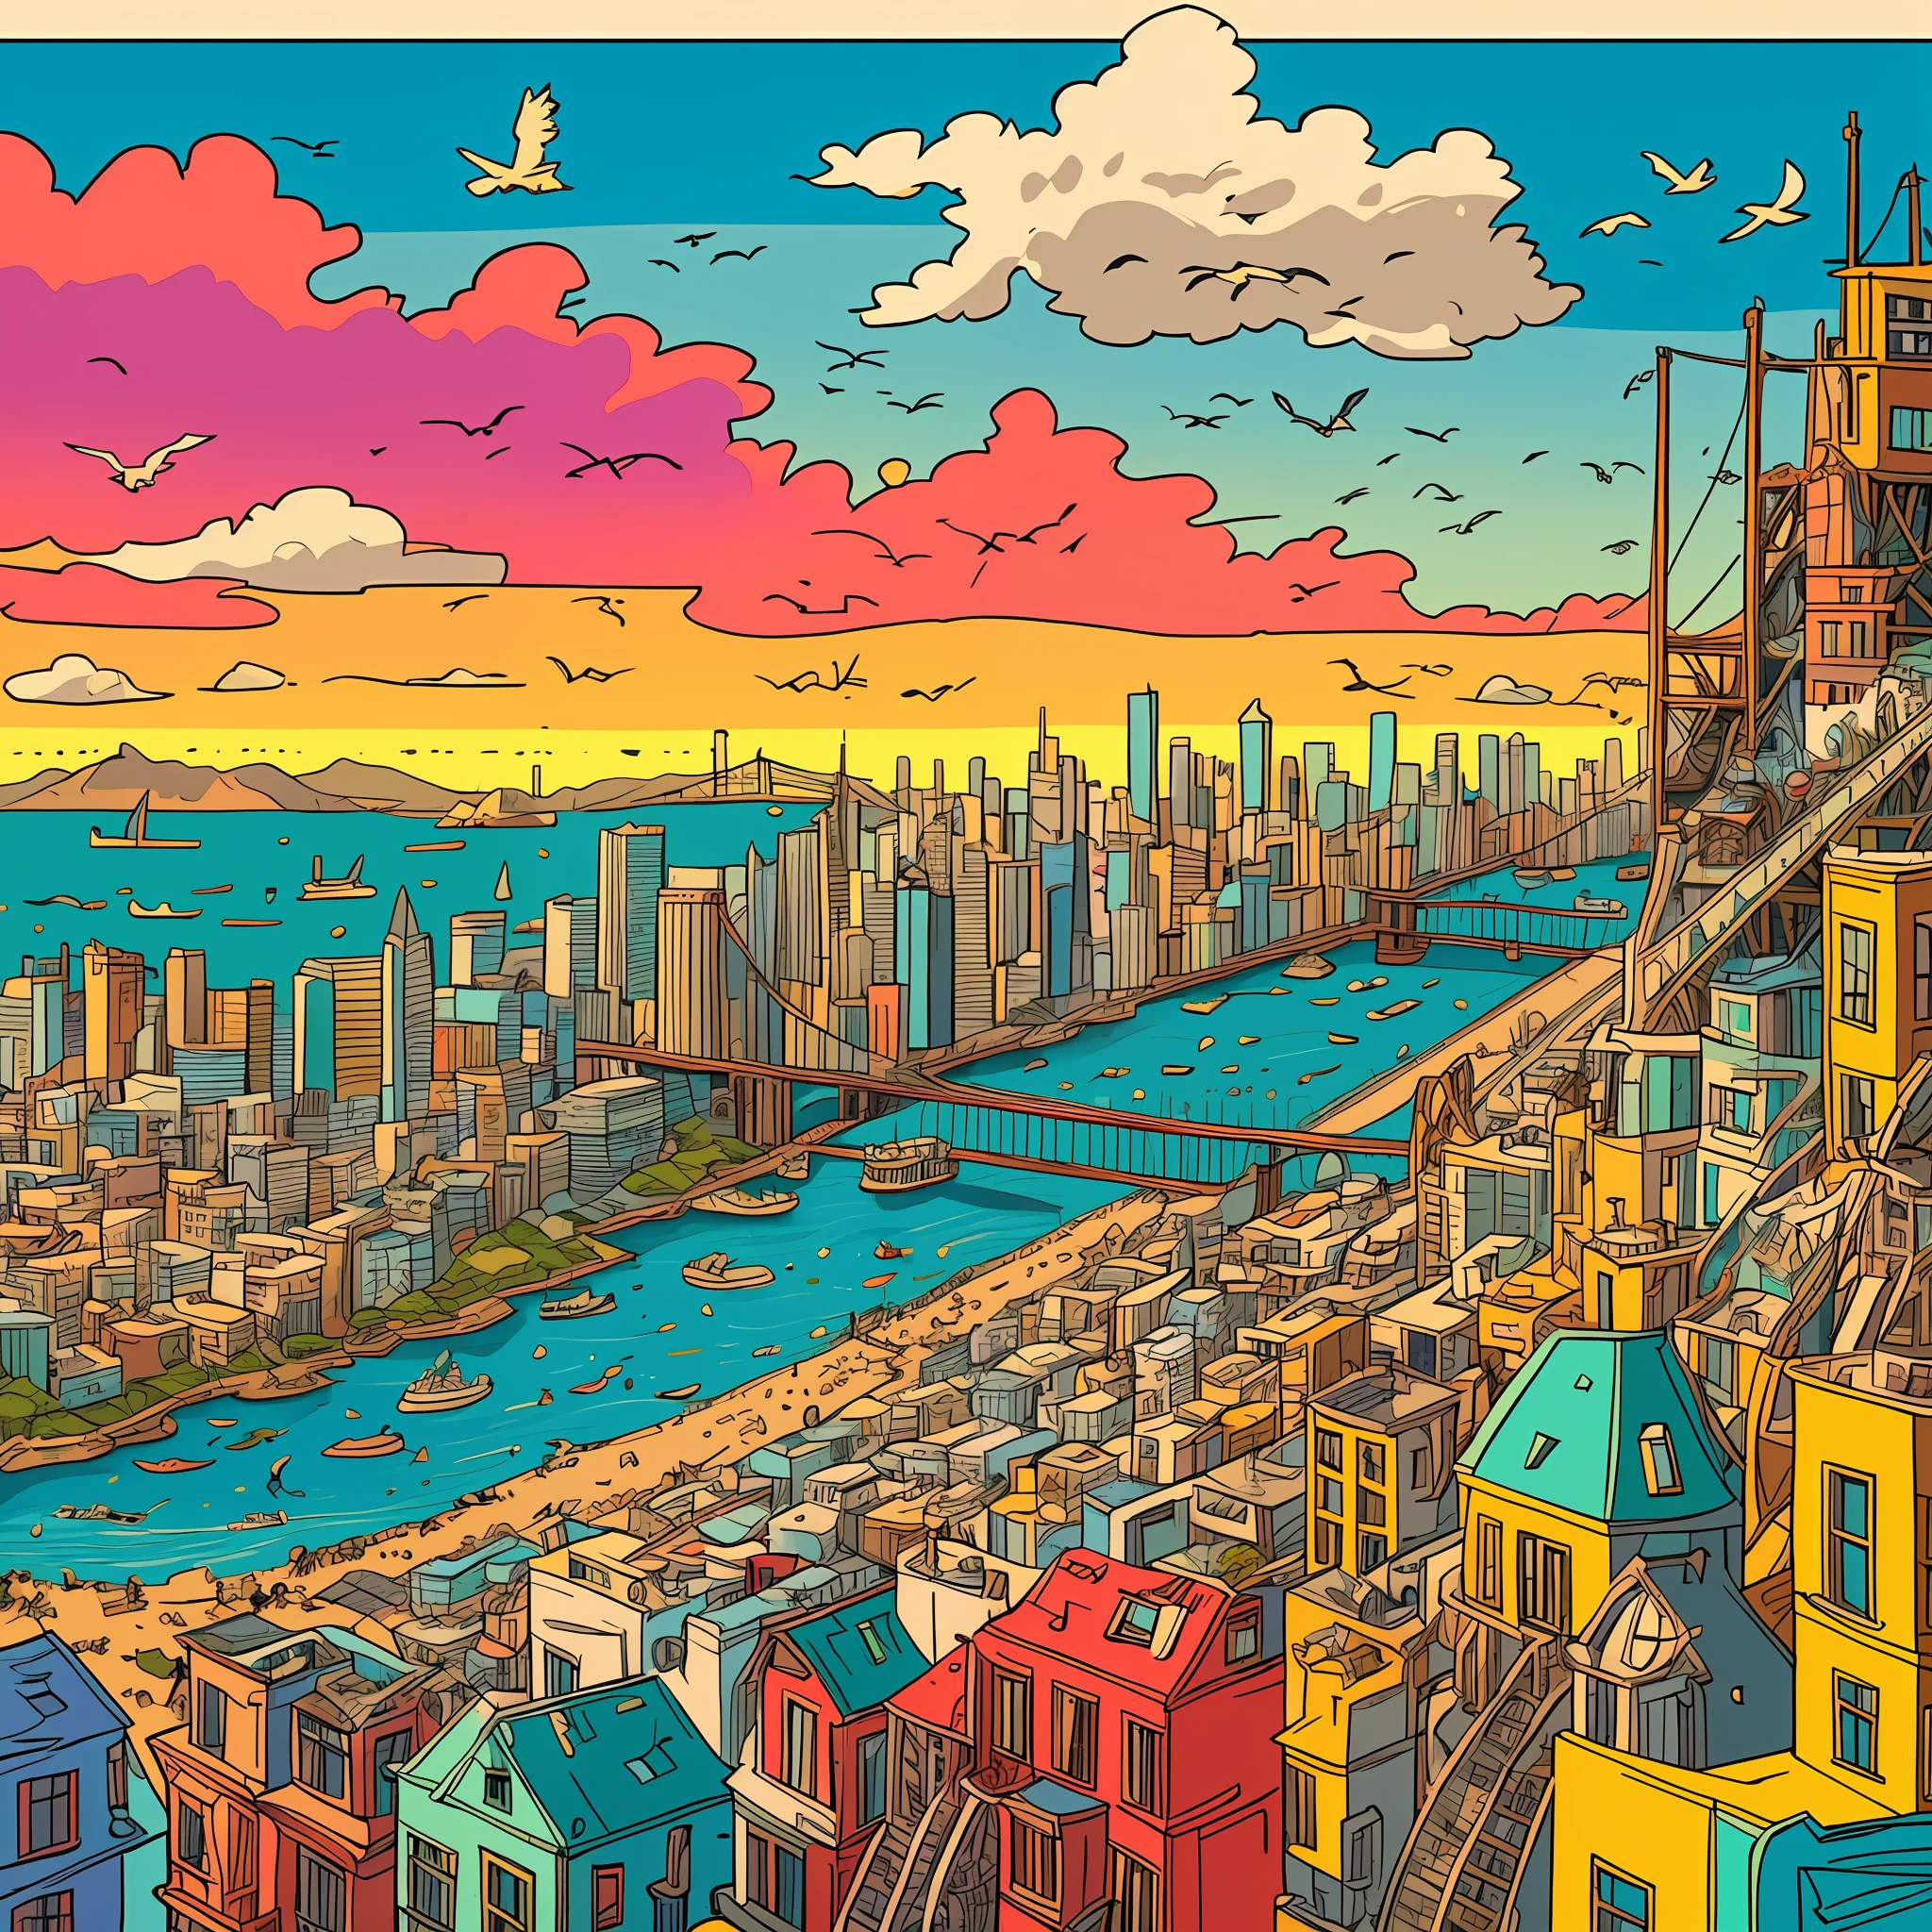 Maximalist chaotic San Francisco, bird's eye view, Herg illustration, tin cartoon style, pen and ink, drawn picture, from afar, the whole city, sunset and birds, bigger, whole city, drawn, sky is beautiful, sea, sky to ocean ratio half the distance, beautiful bridge can be seen in the distance